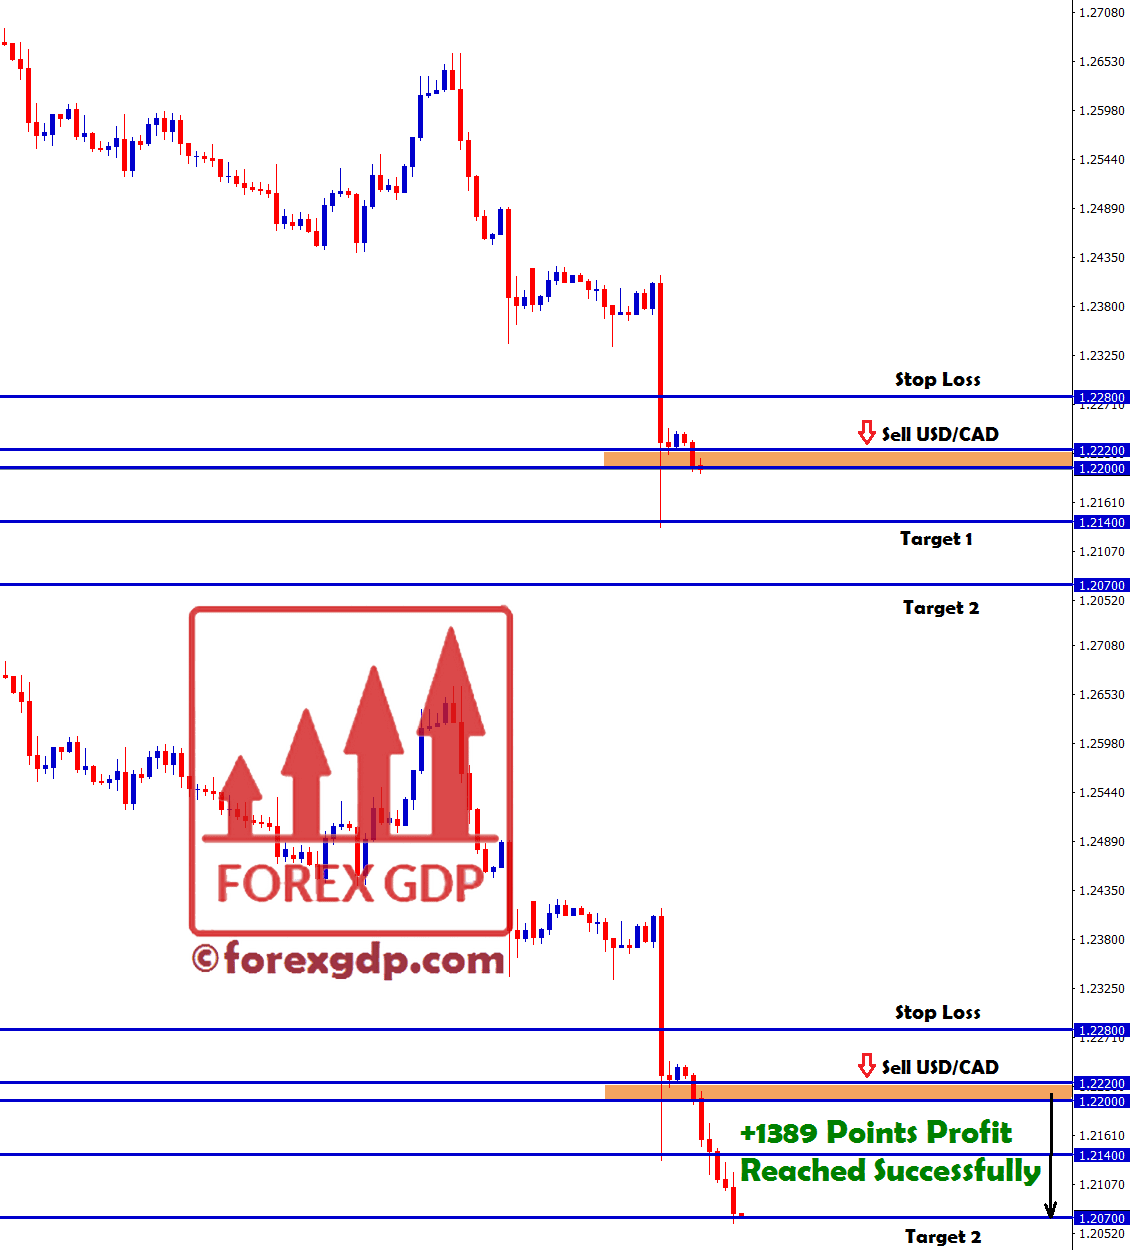 Sell USD CAD strategy reach 1389 points profit